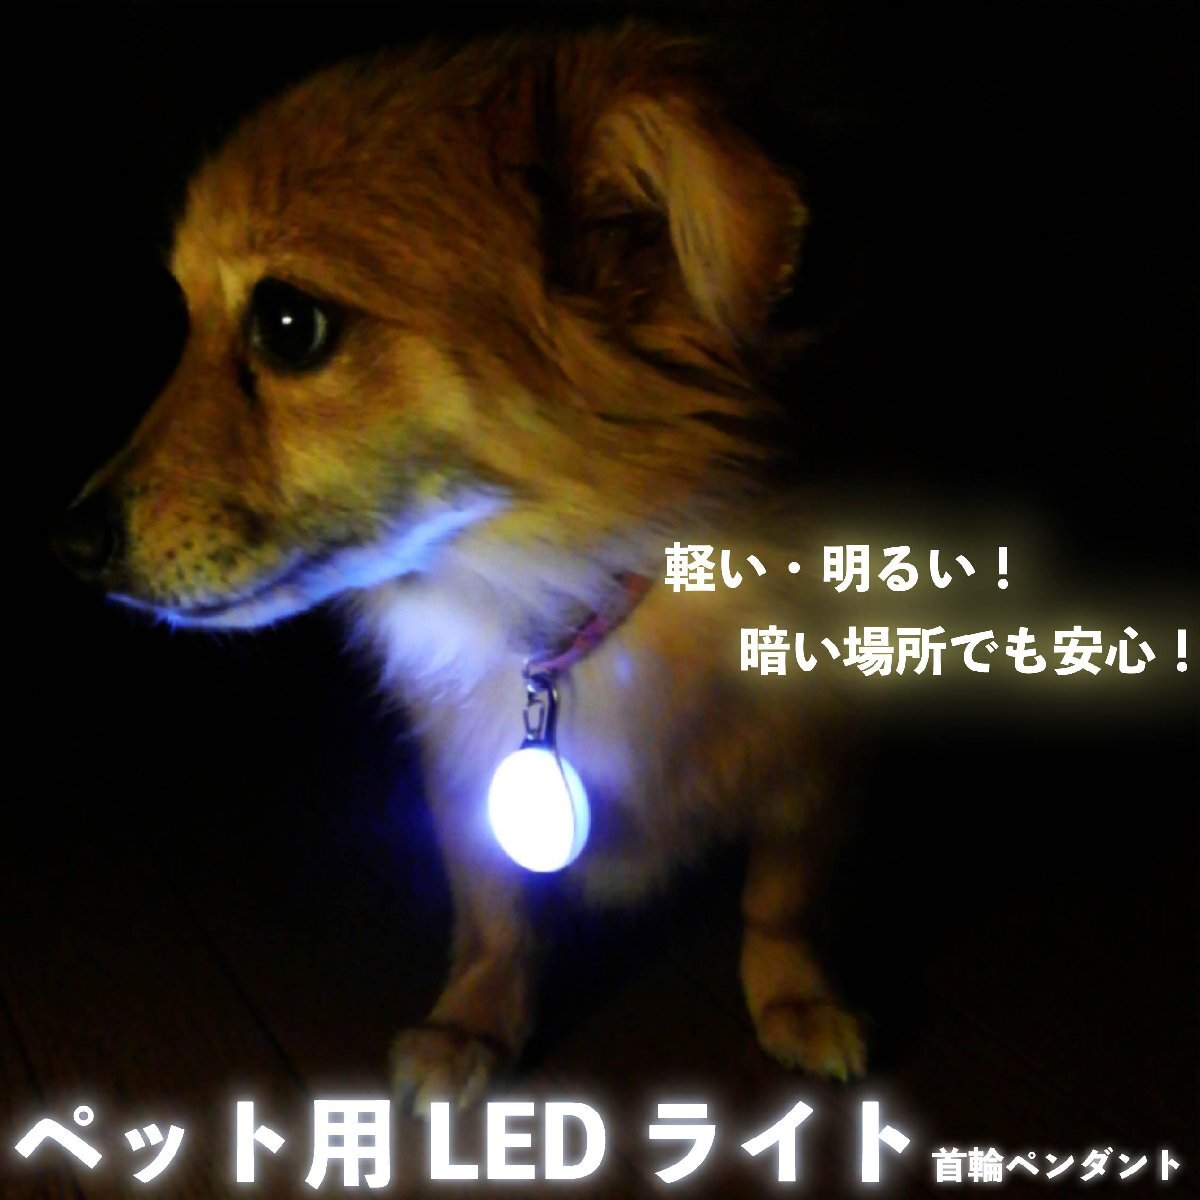 H10334【送料無料】【新品】ペット用首輪ペンダントLED お散歩ライト イエロー ペンダント 光る 犬 猫 夜間 散歩 安全 リードネックレス_画像1